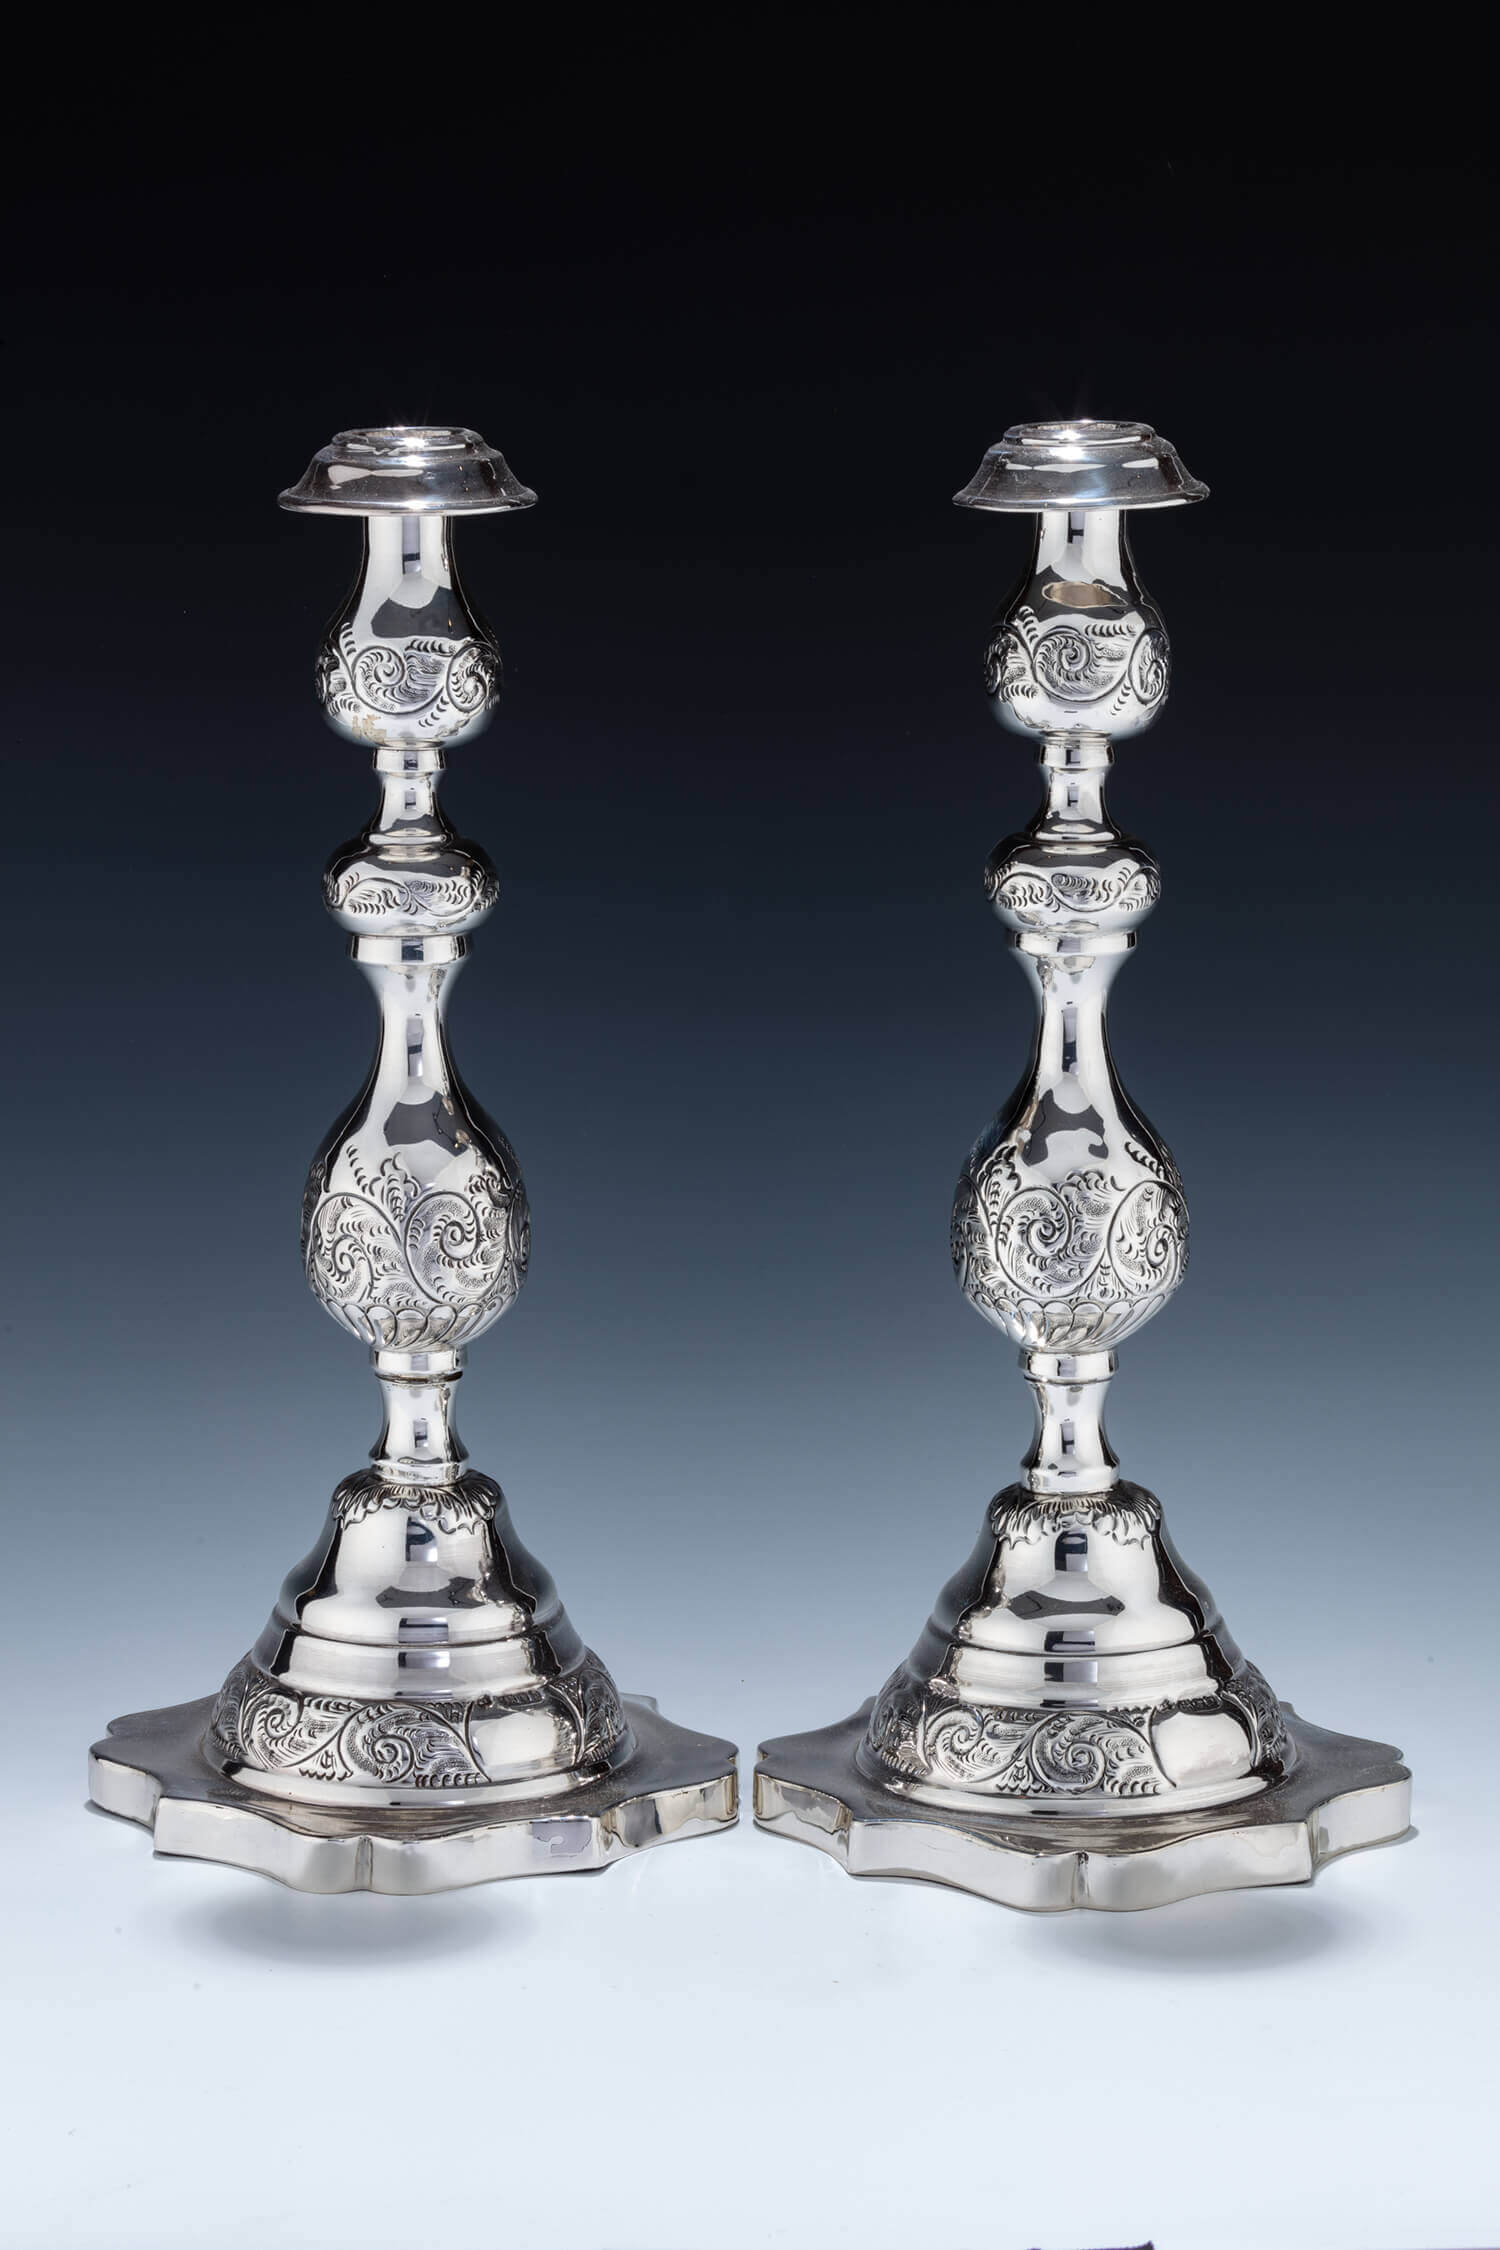 019. A MONUMENTAL PAIR OF STERLING SILVER SABBATH CANDLESTICKS BY MOSHE RUBIN